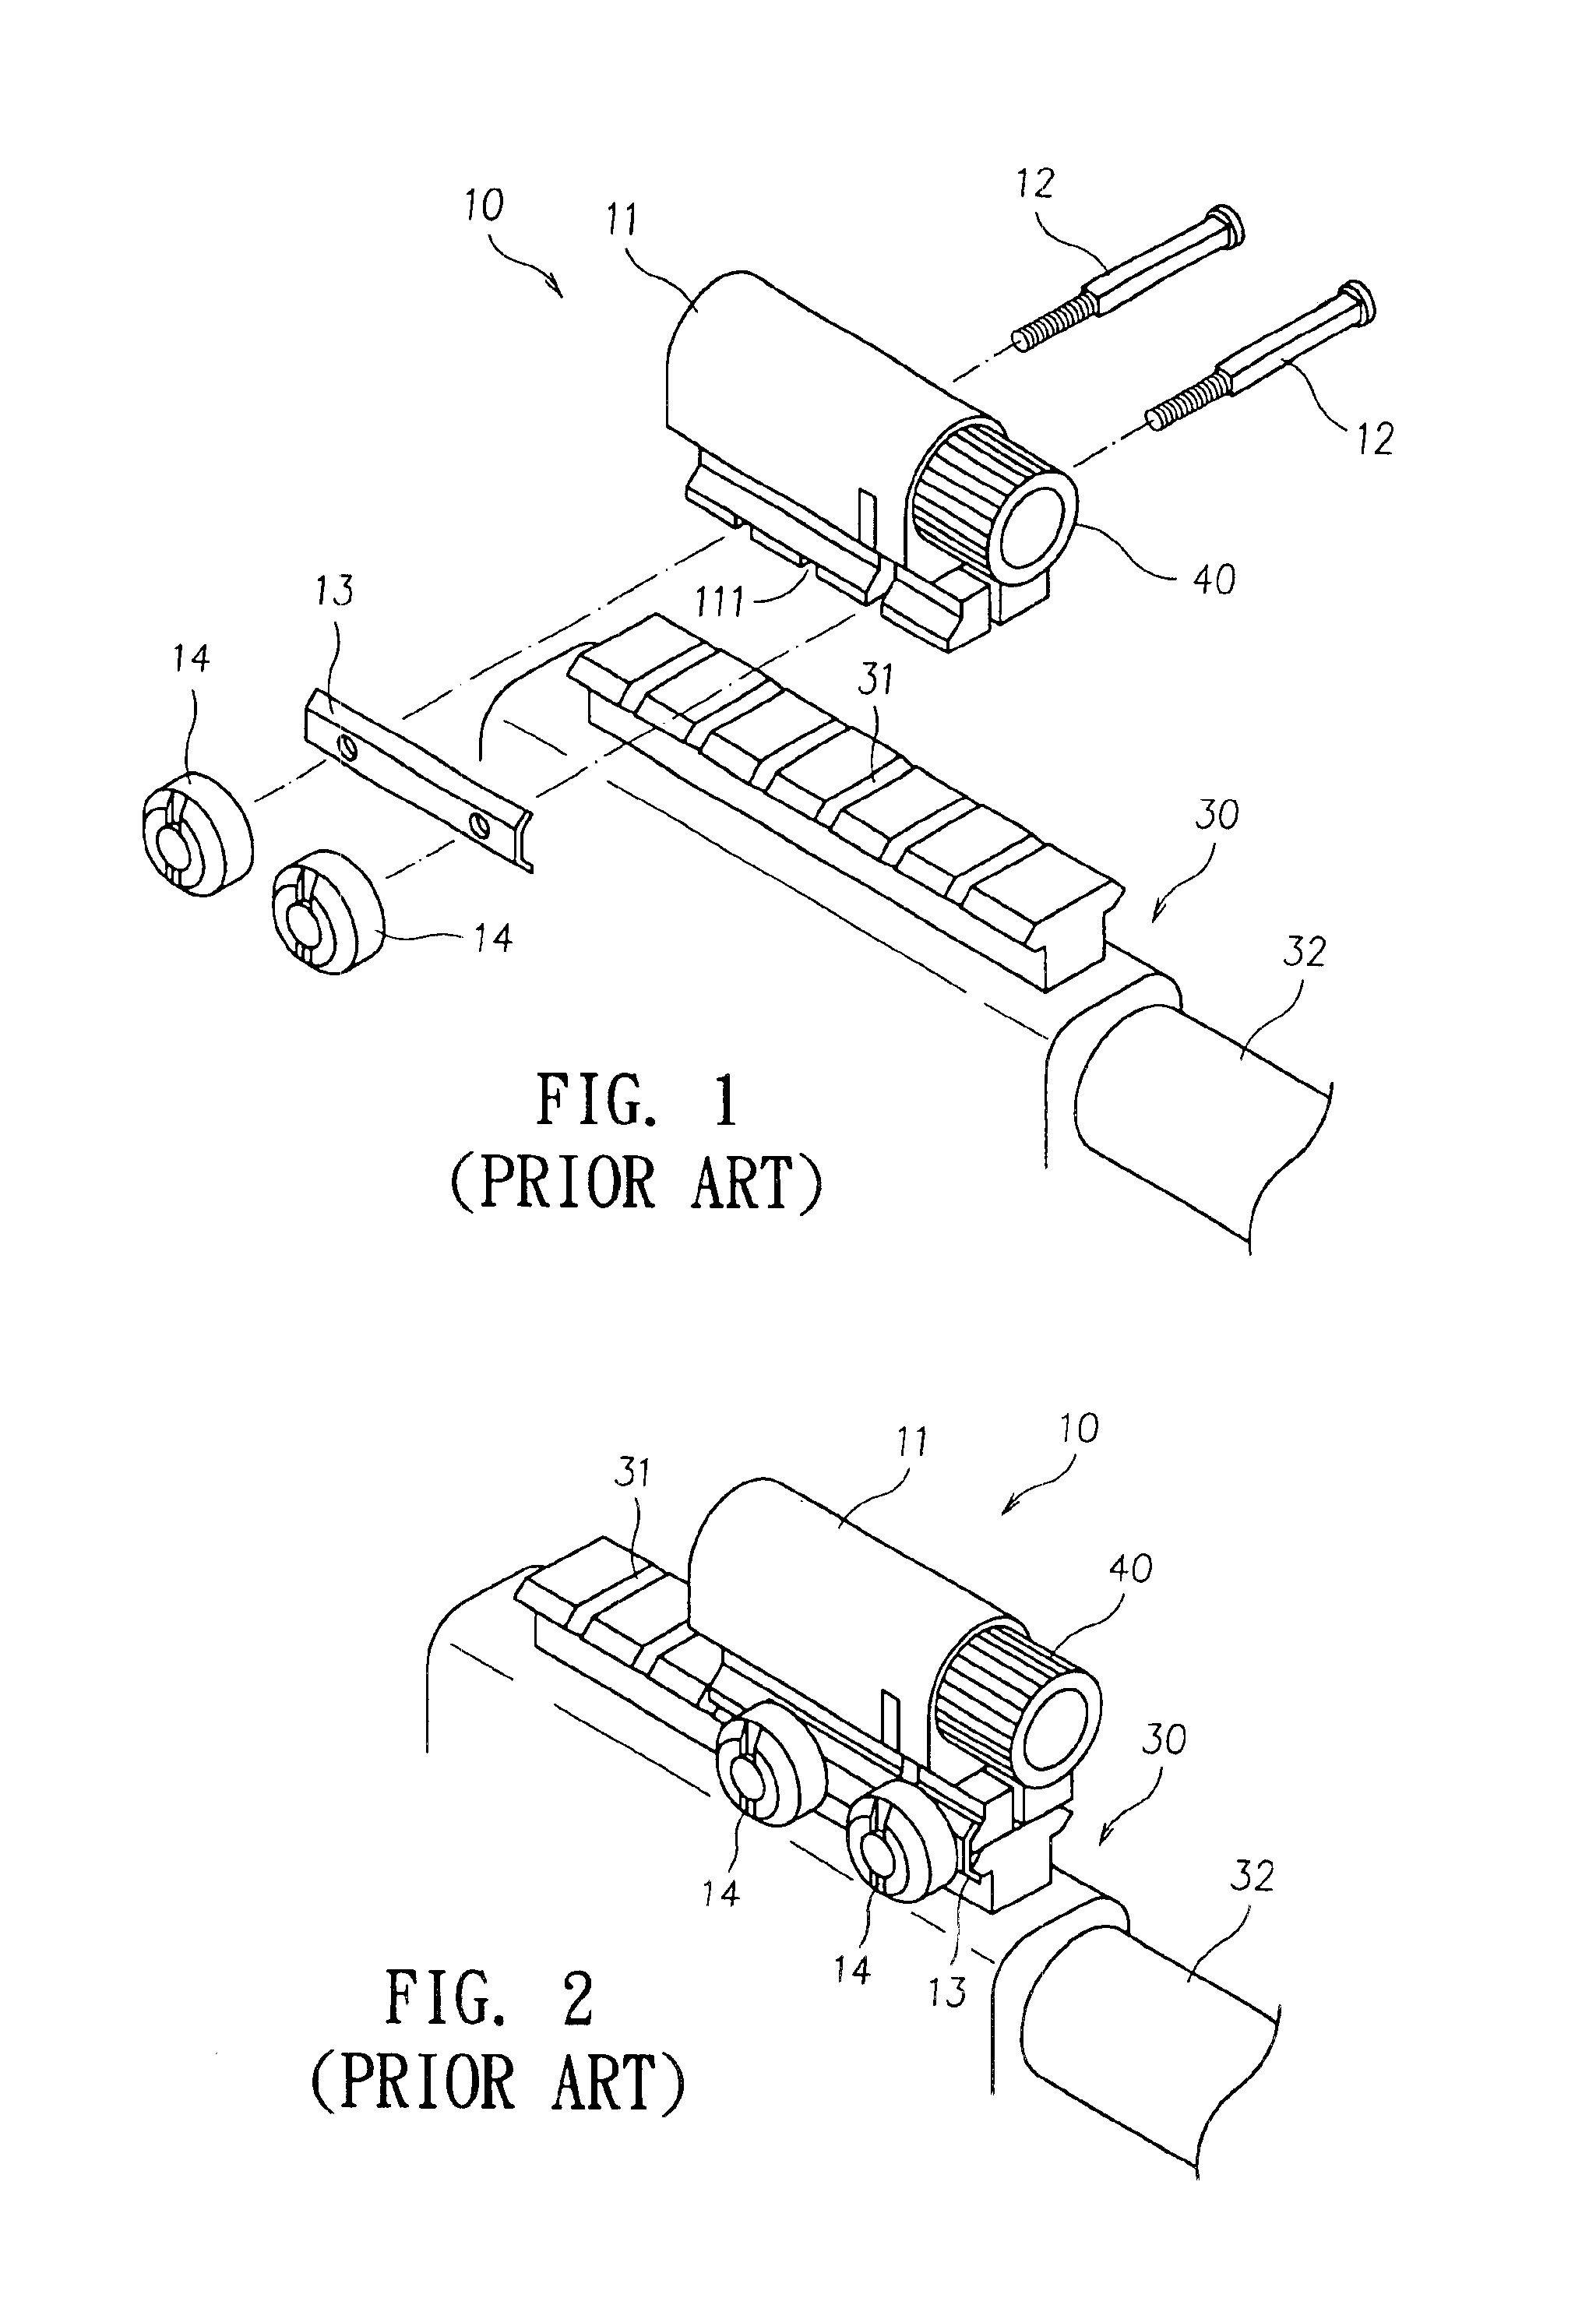 Connecting device for weapon accessory